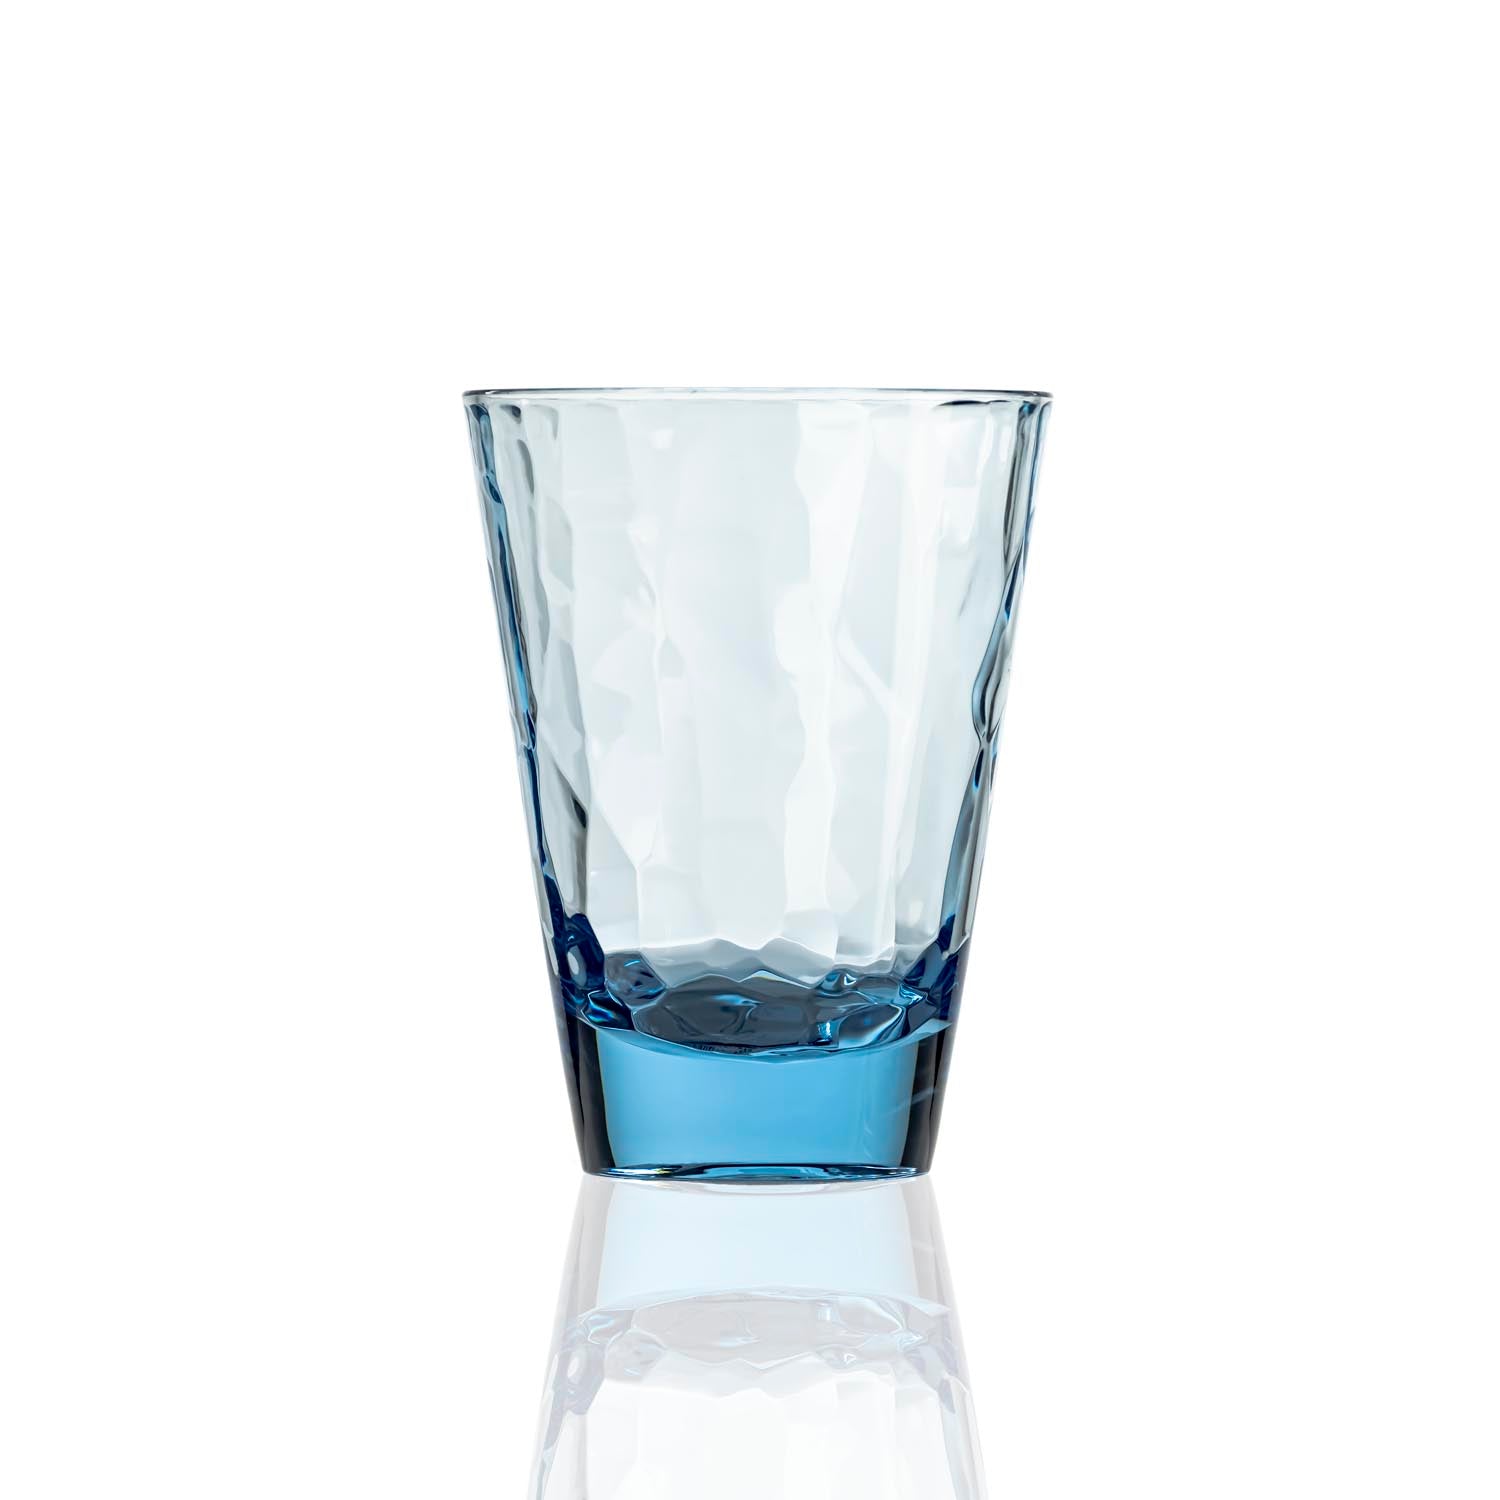 14-ounce blue acrylic tumbler glass from the Merritt Designs Cascade collection. Front view on white background